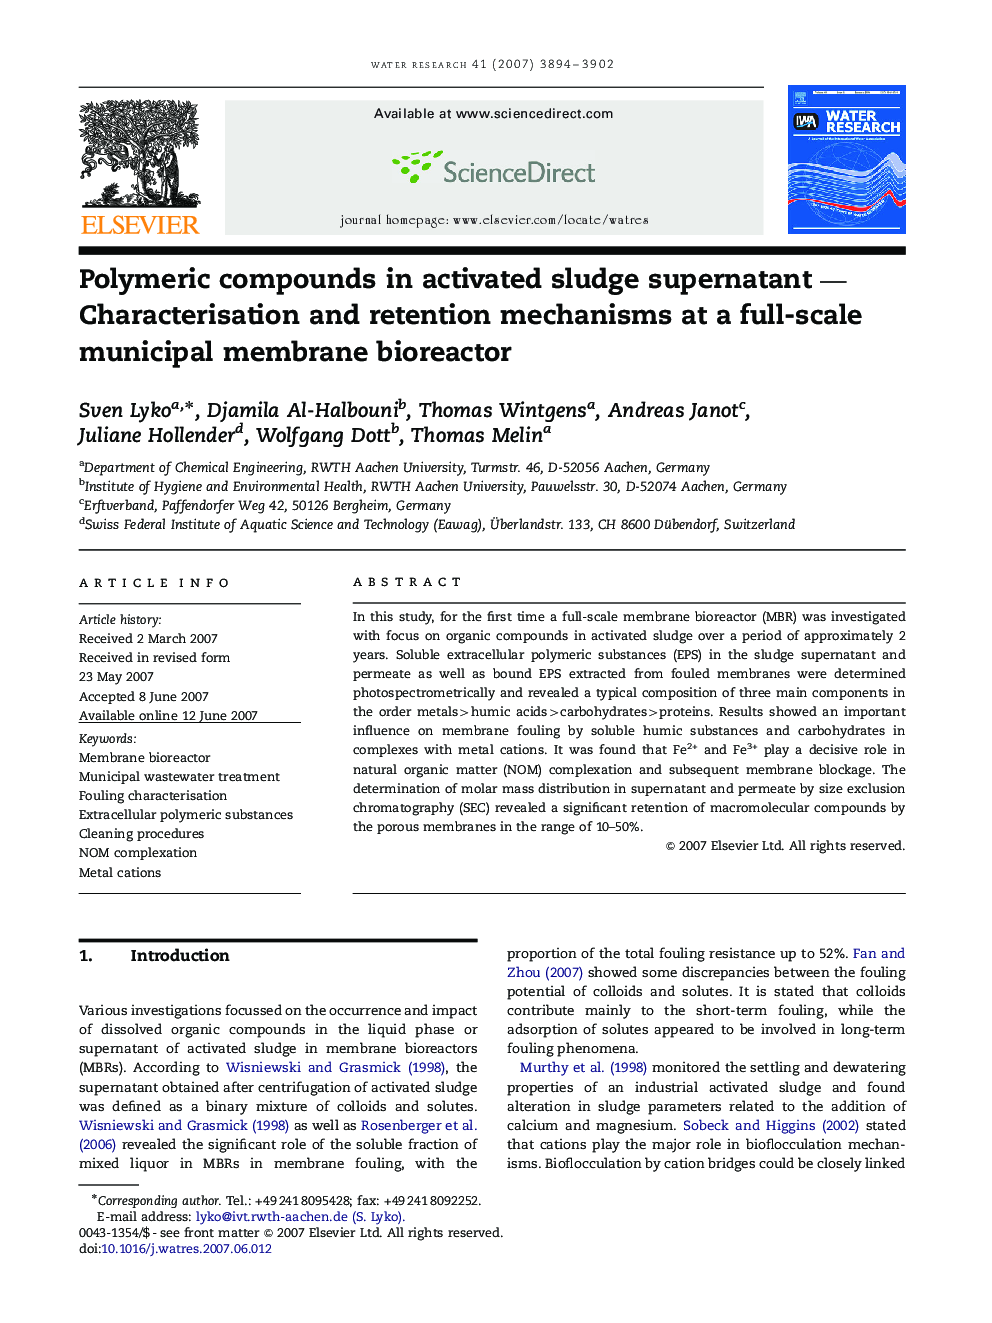 Polymeric compounds in activated sludge supernatant — Characterisation and retention mechanisms at a full-scale municipal membrane bioreactor